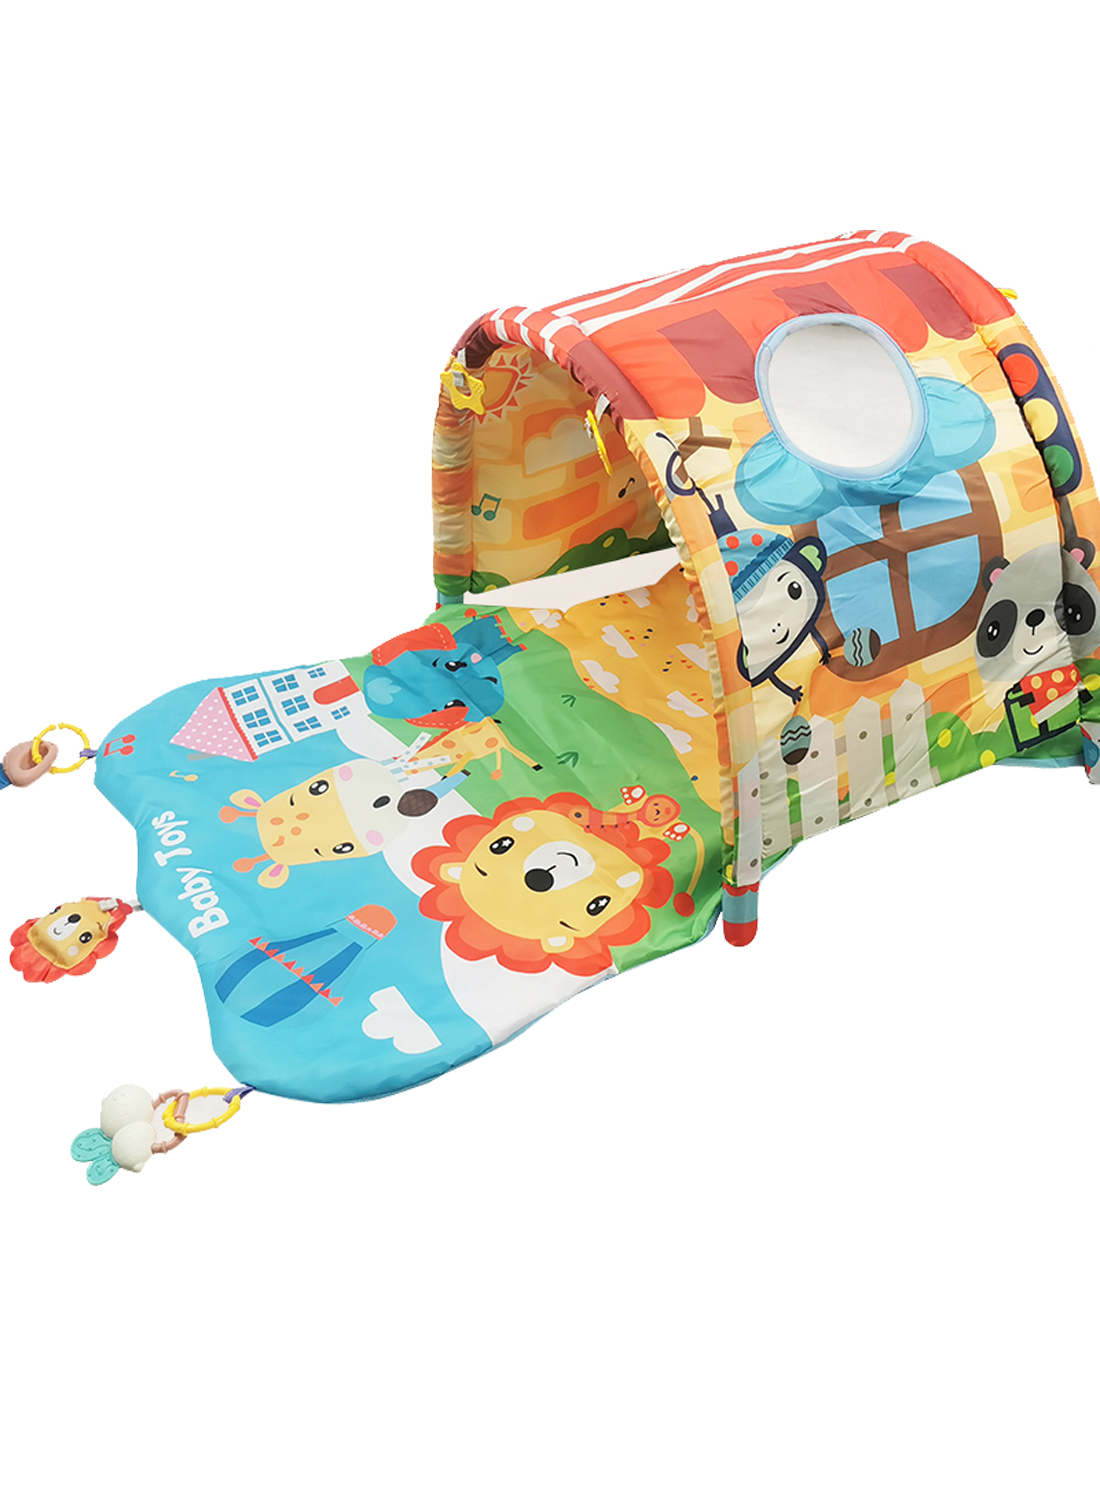 4-in-1 Baby Gym, Play Mat & Play Gym, Combination Baby Activity Gym with Sensory Exploration and Motor Skill Development